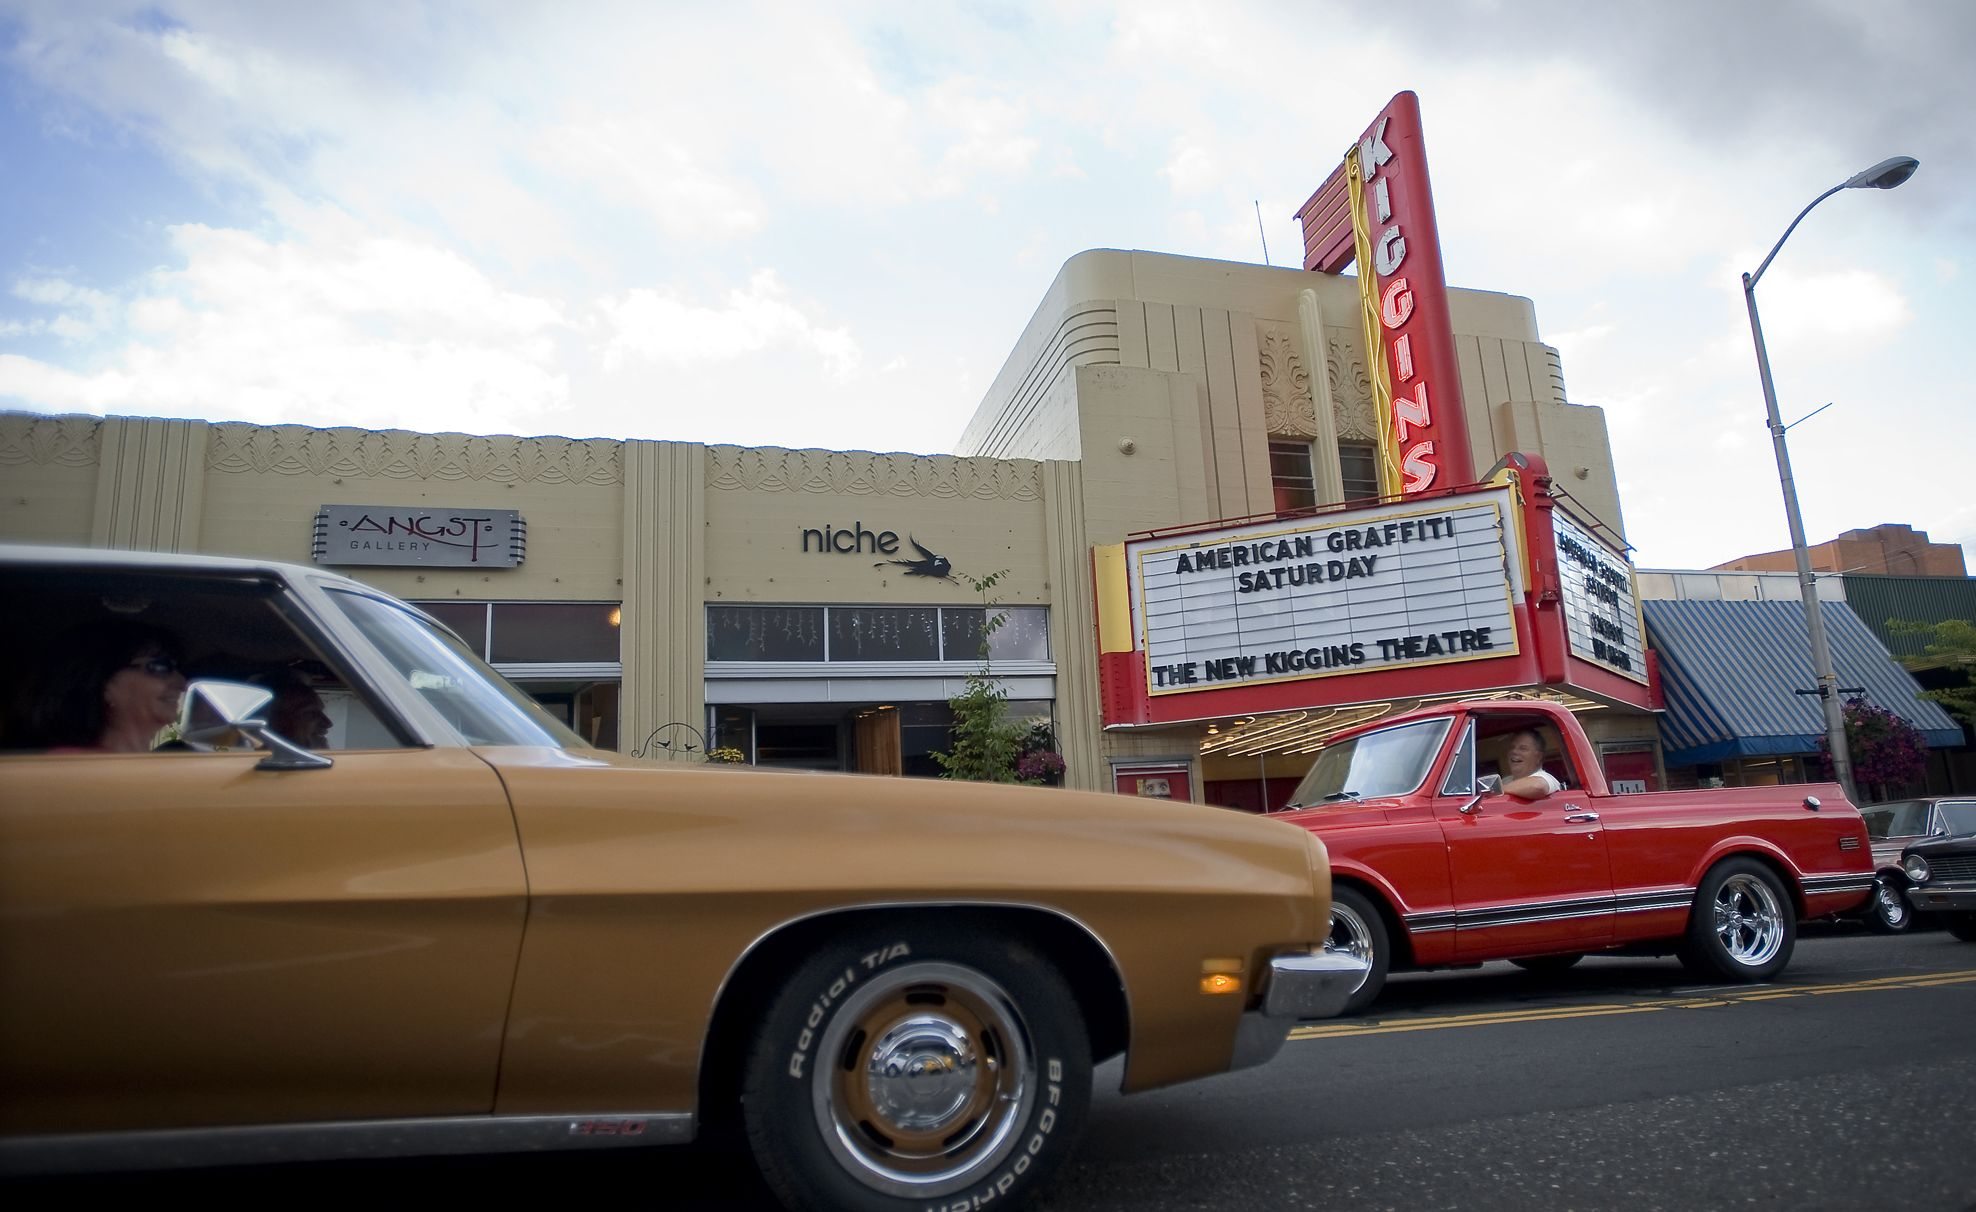 The Kiggins Theatre showed the film &quot;American Graffiti&quot; for this year's Cruisin' the Gut, an annual classic-car show, in July in downtown Vancouver.